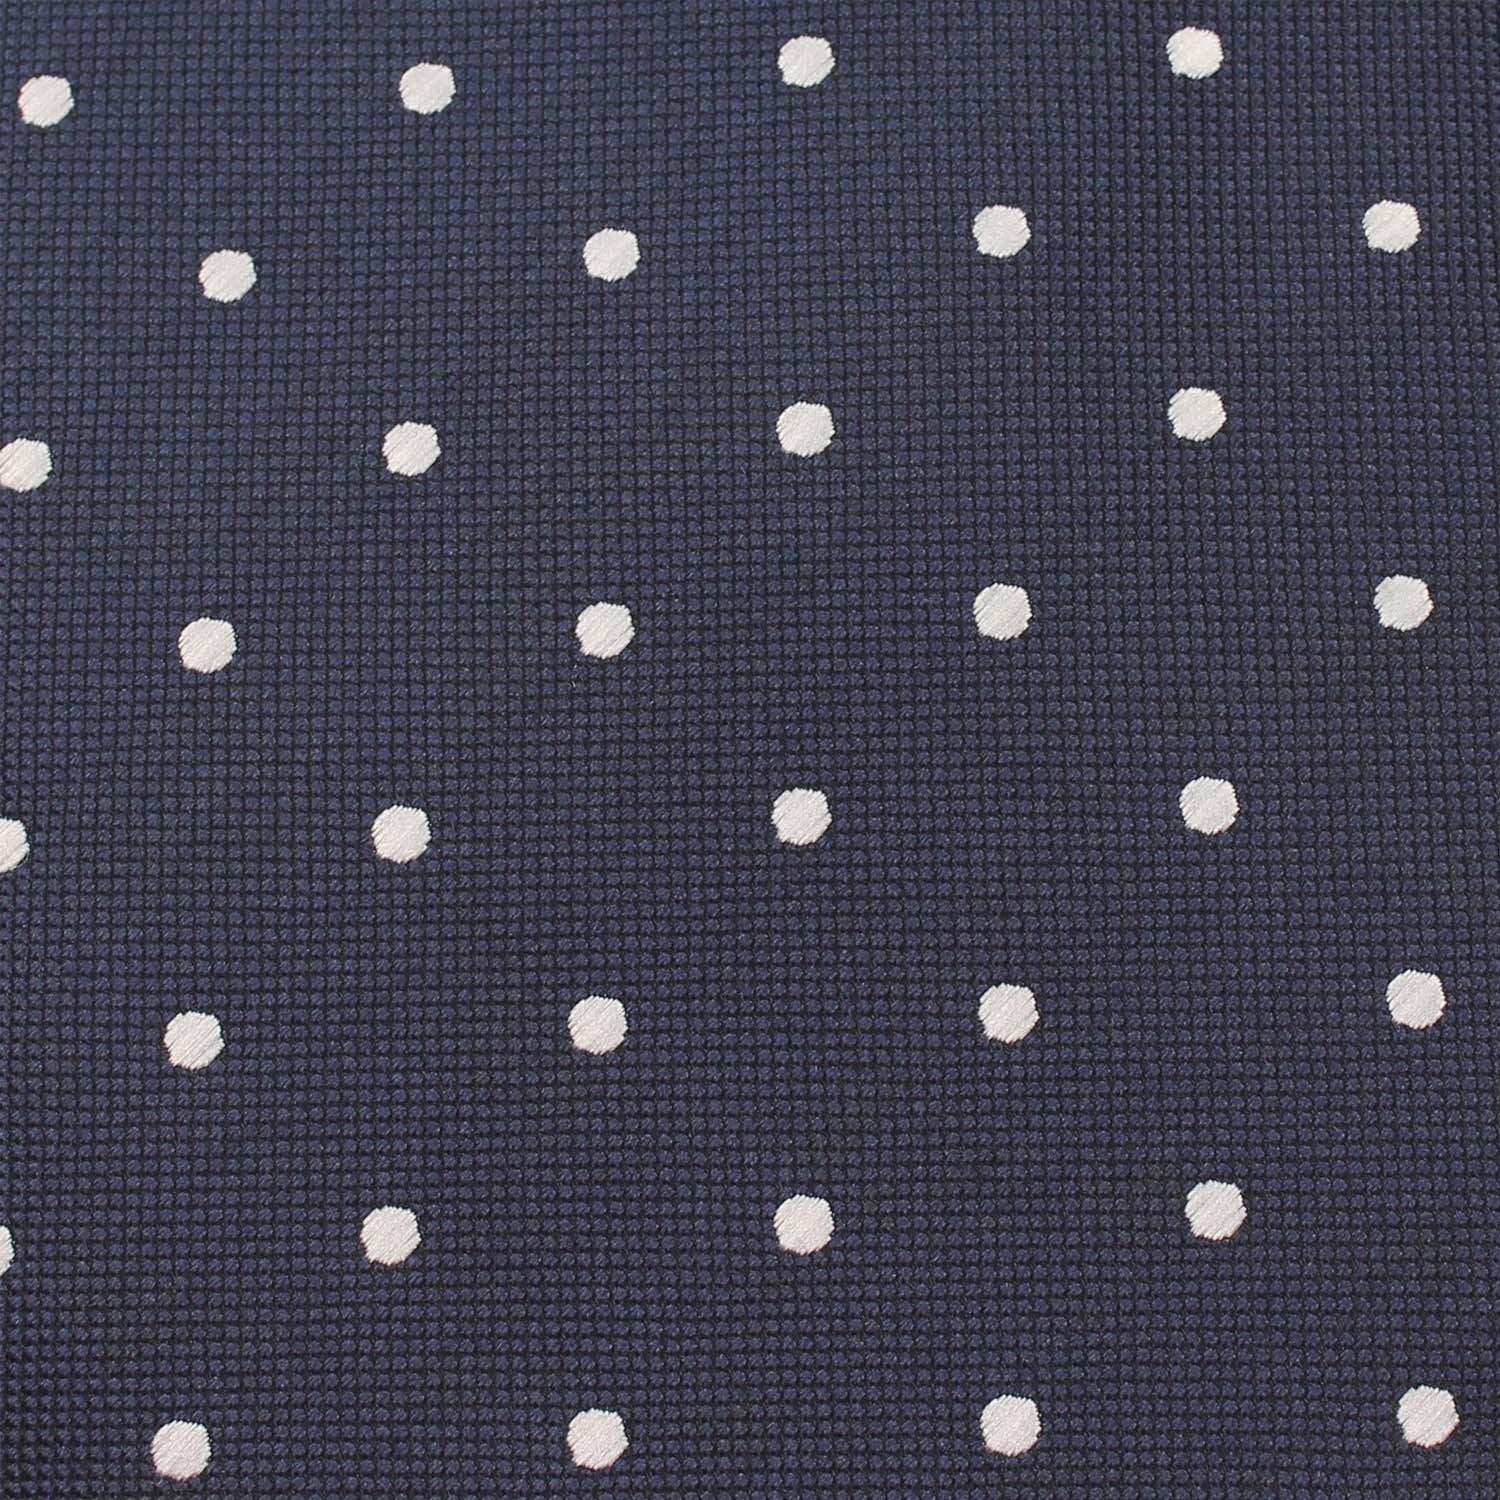 Navy Blue with White Polka Dots Fabric Skinny Tie X325